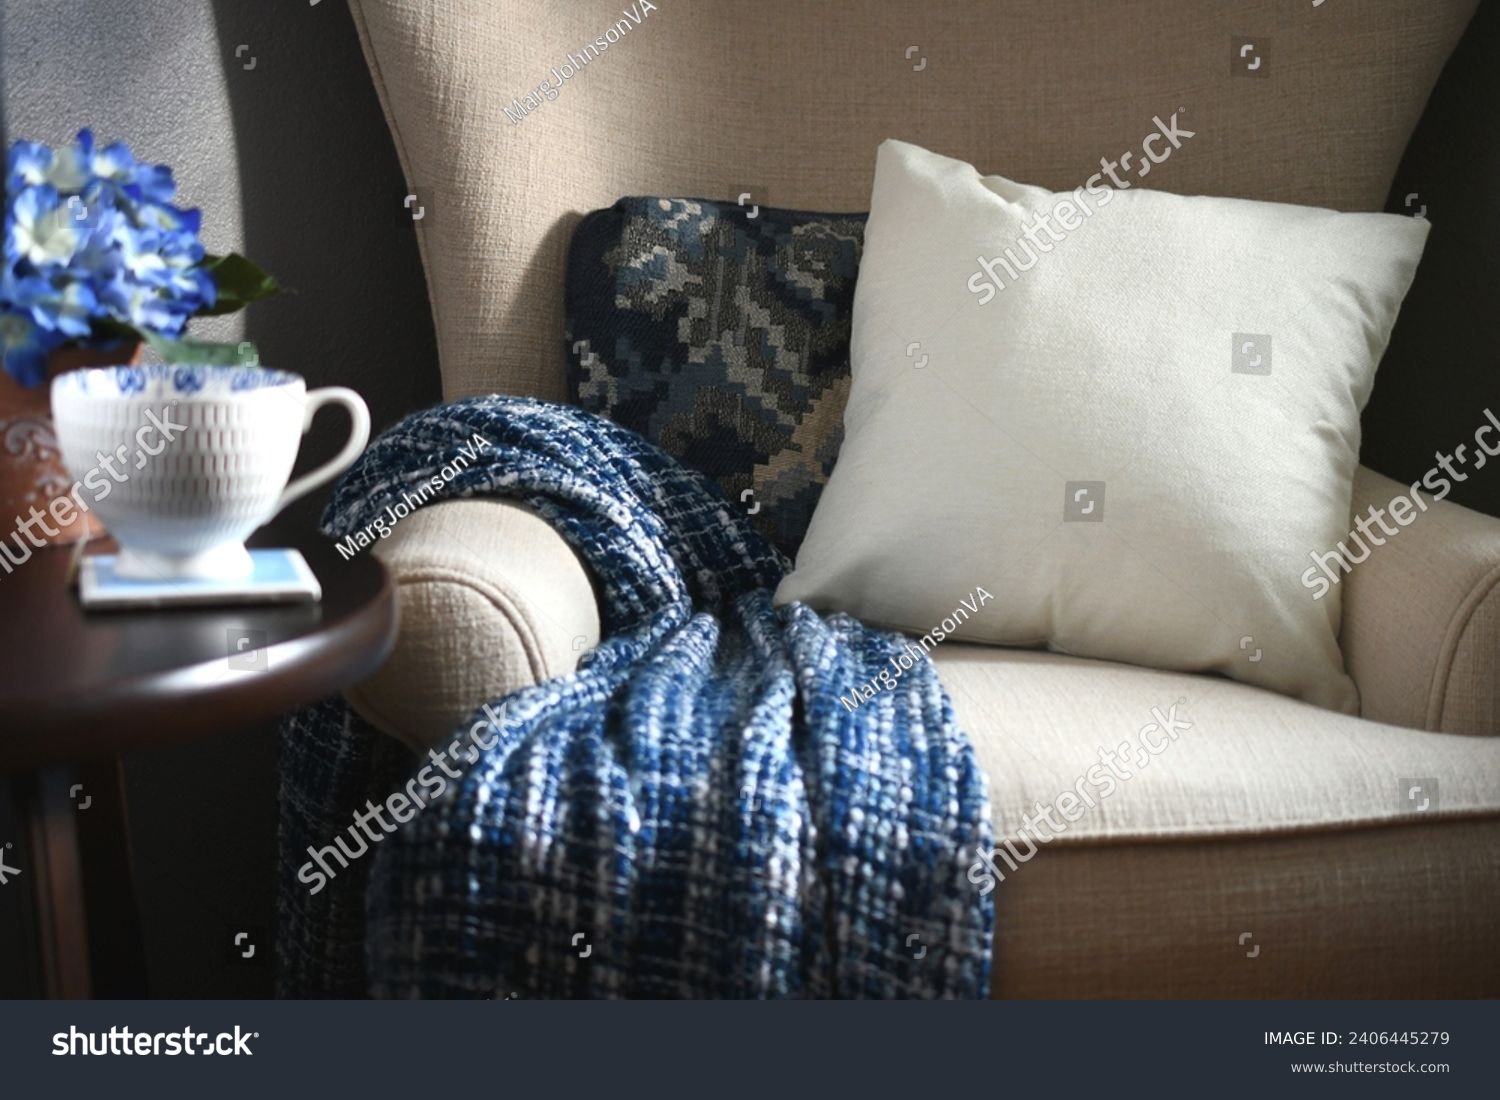 Plain canvas throw pillow suitable for mock up mockup on a chair with blue throw blanket - your design, message or logo #2406445279